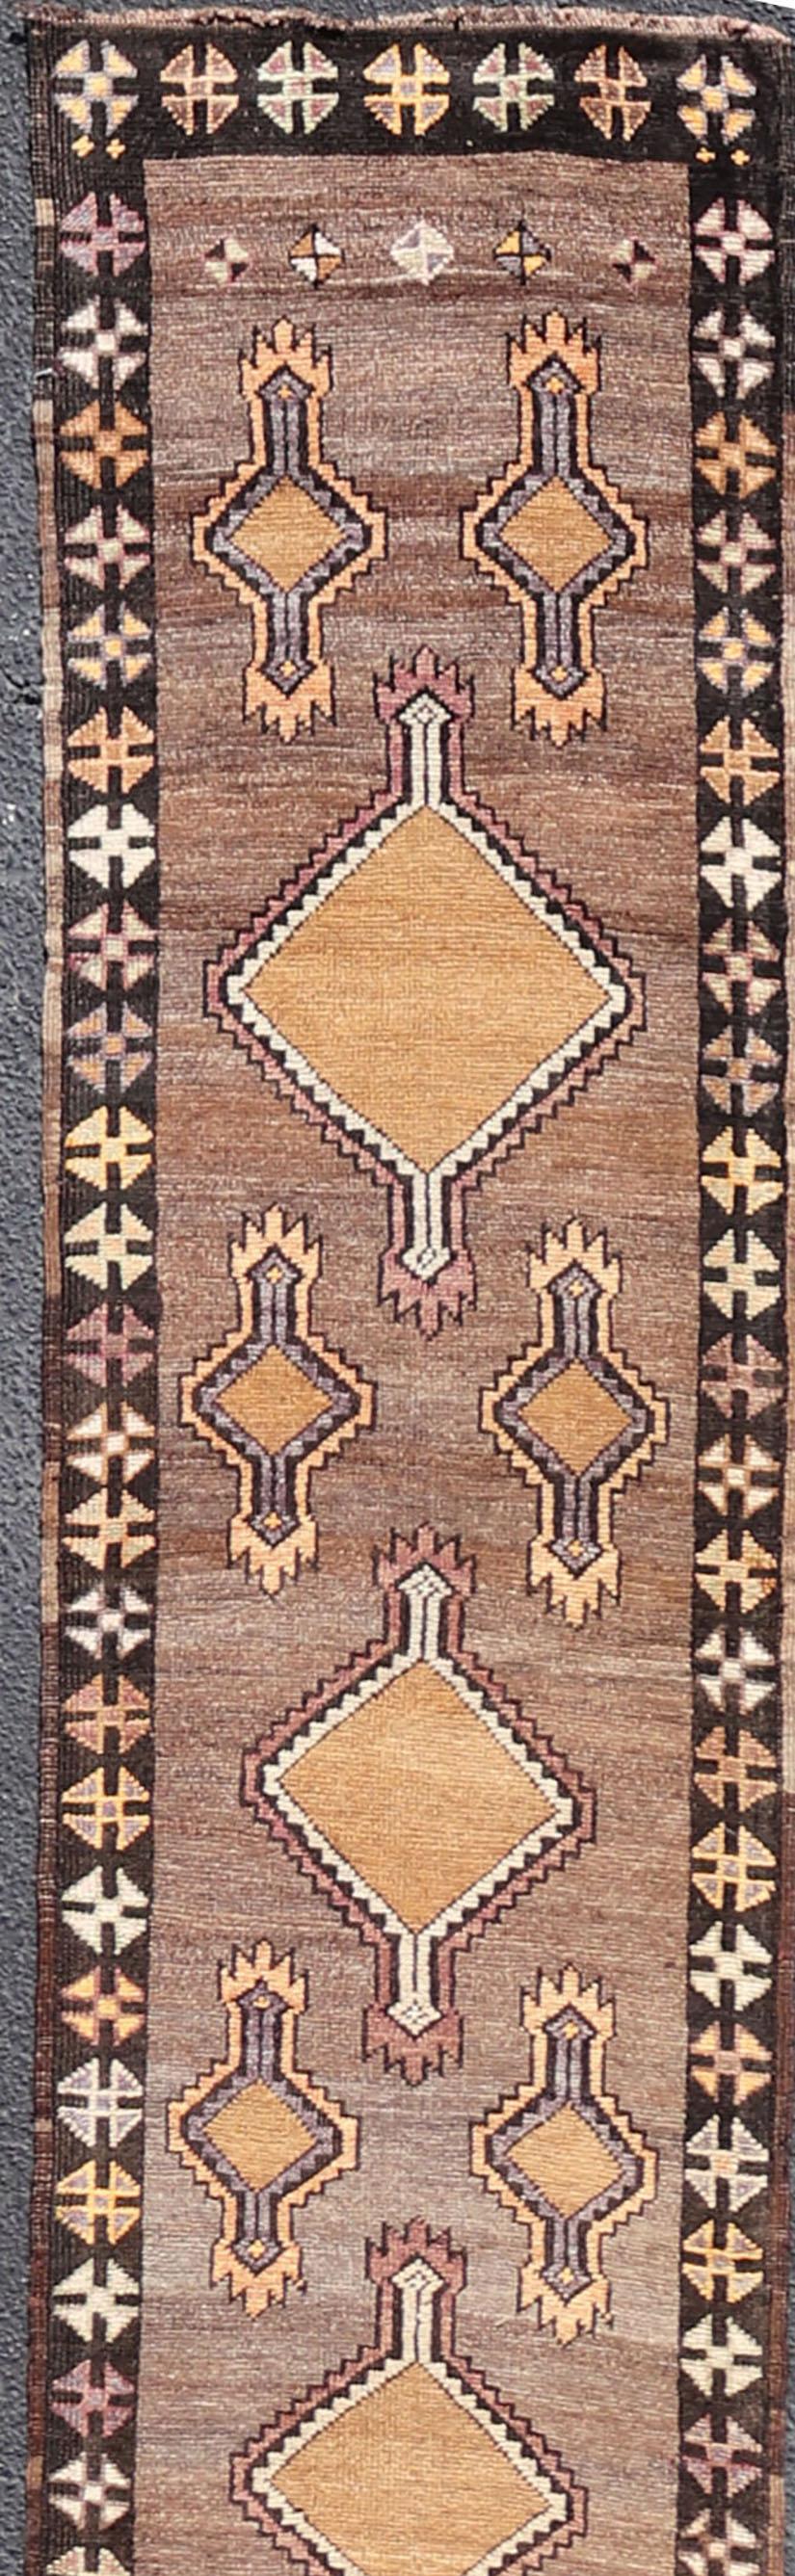 Long and narrow vintage turkish kars runner with Tribal design and Medallions in light purple, light orange, gray. Keivan Woven Arts / rug / EMB-9662-P13548, country of origin / type: Turkey / Oushak, circa 1940.

Measures: 2' x 16'10. 

This